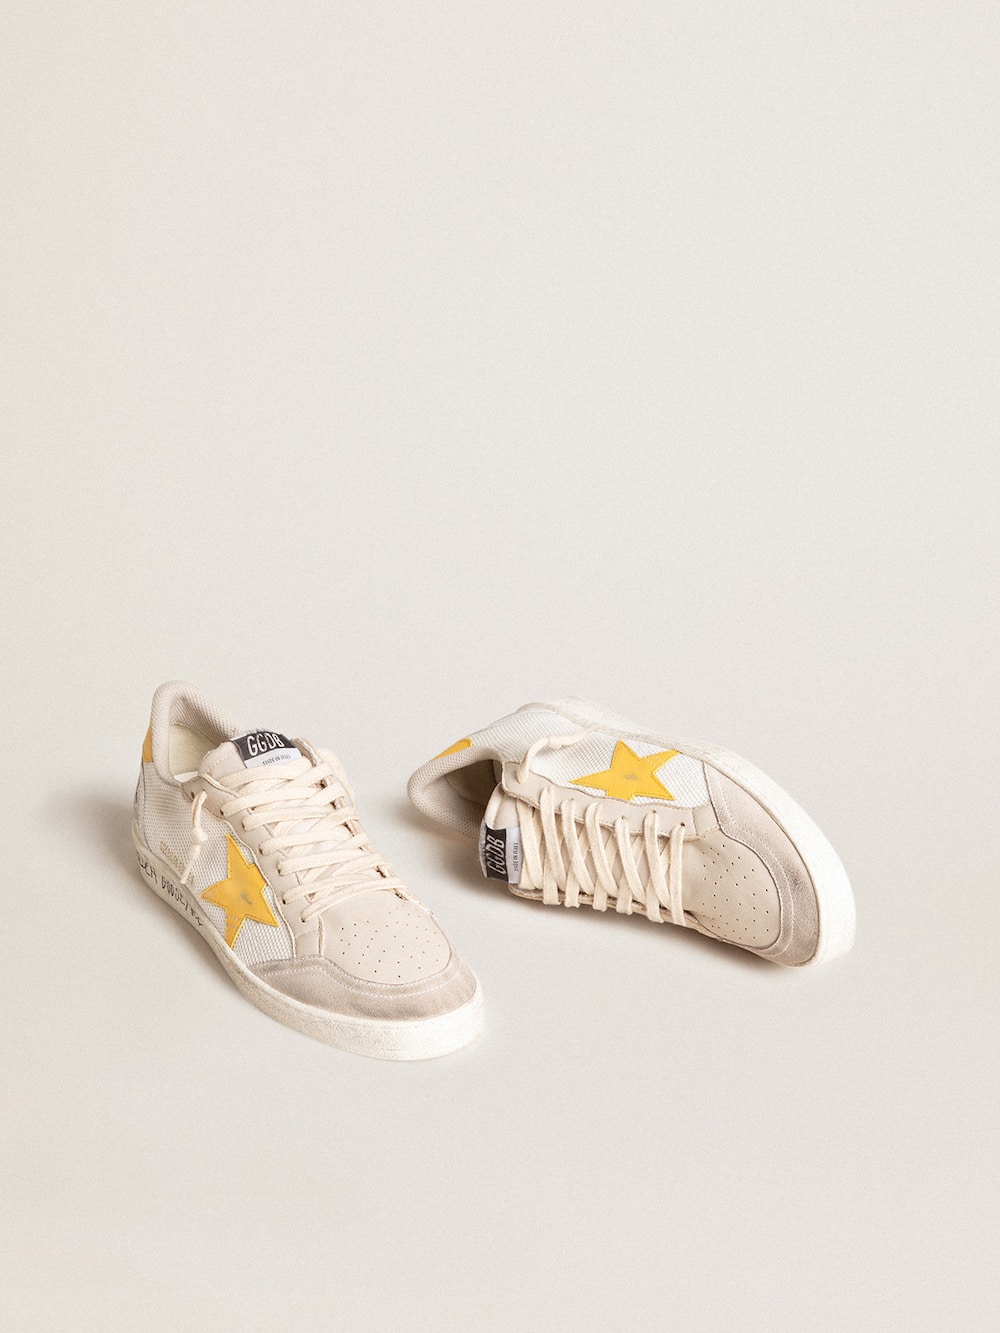 Golden Goose - Ball Star LTD in white mesh with yellow leather star and heel tab in 